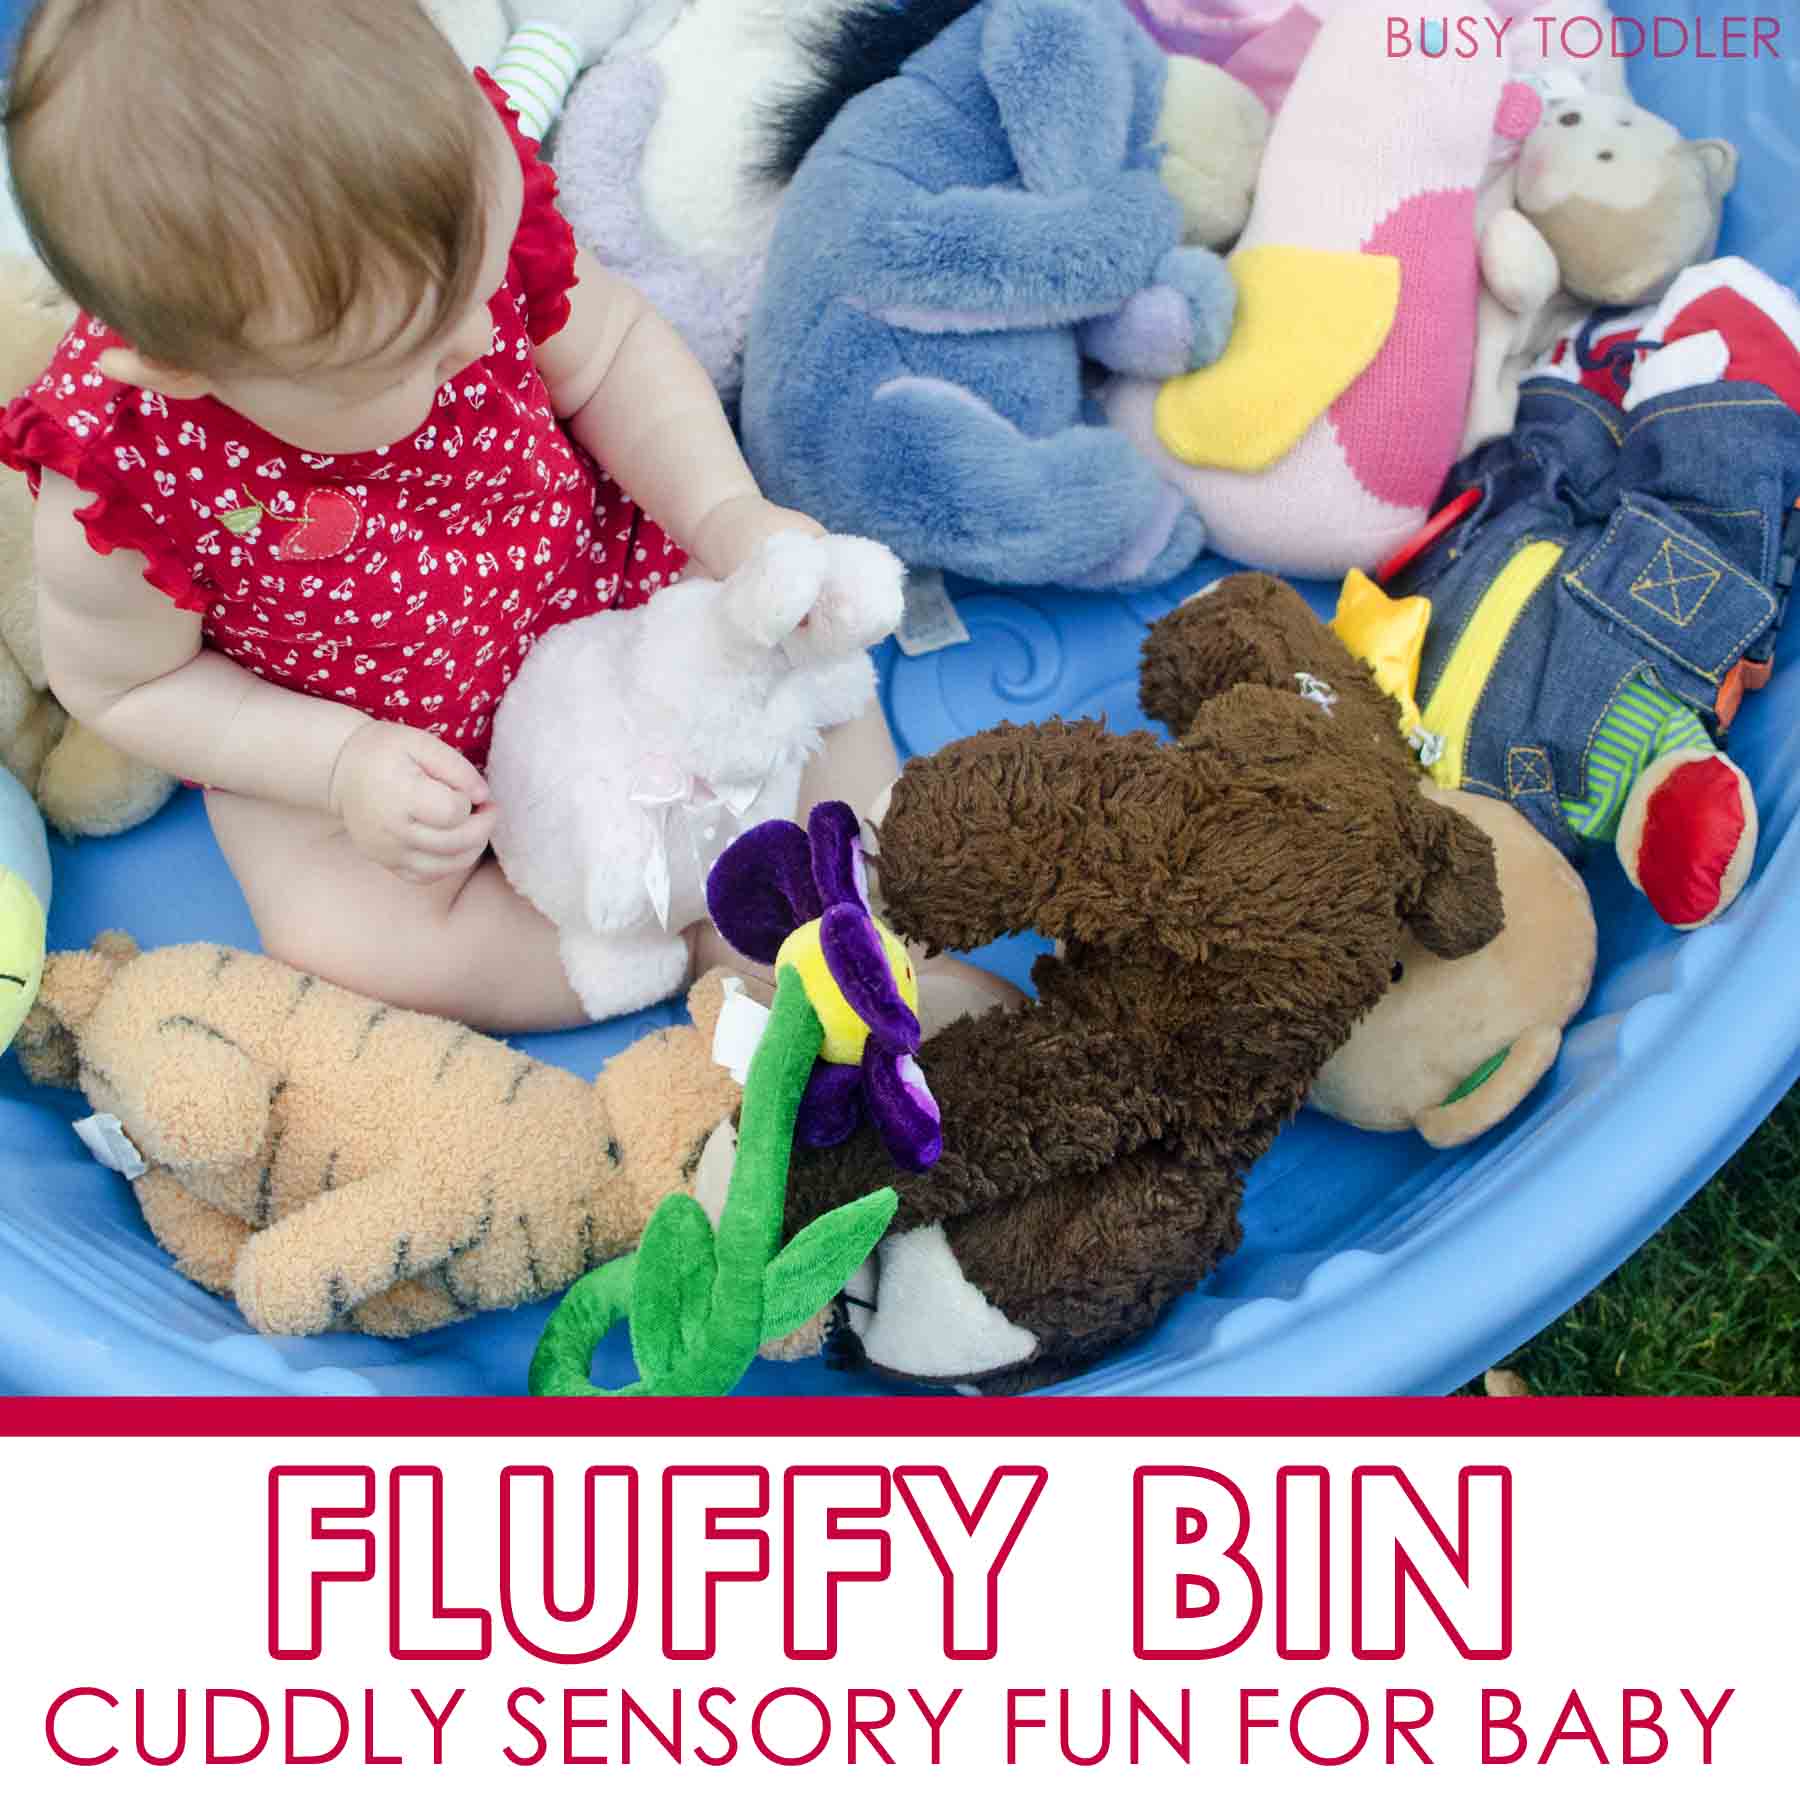 FLUFFY BIN:  Make a cuddly sensory experience for baby with this simple activity; easy baby activity